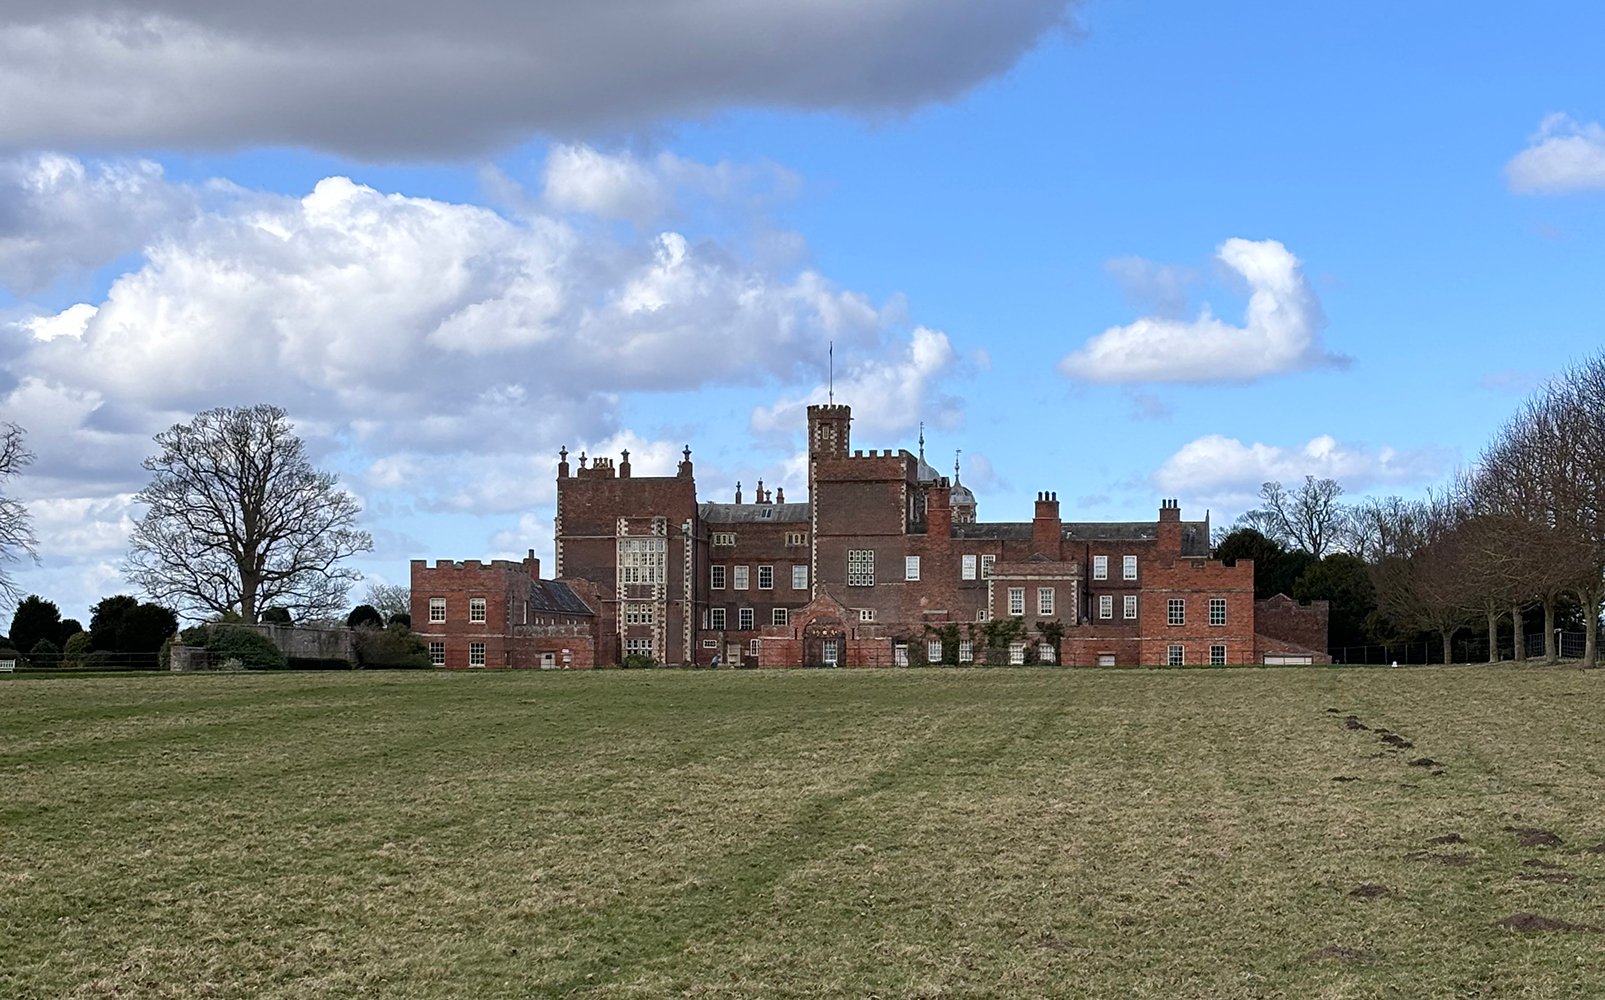 Image name burton constable hall red bricks blue sky and clouds east yorkshire the 13 image from the post A look at the history of Burton Constable Hall, with Dr Emma Wells in Yorkshire.com.